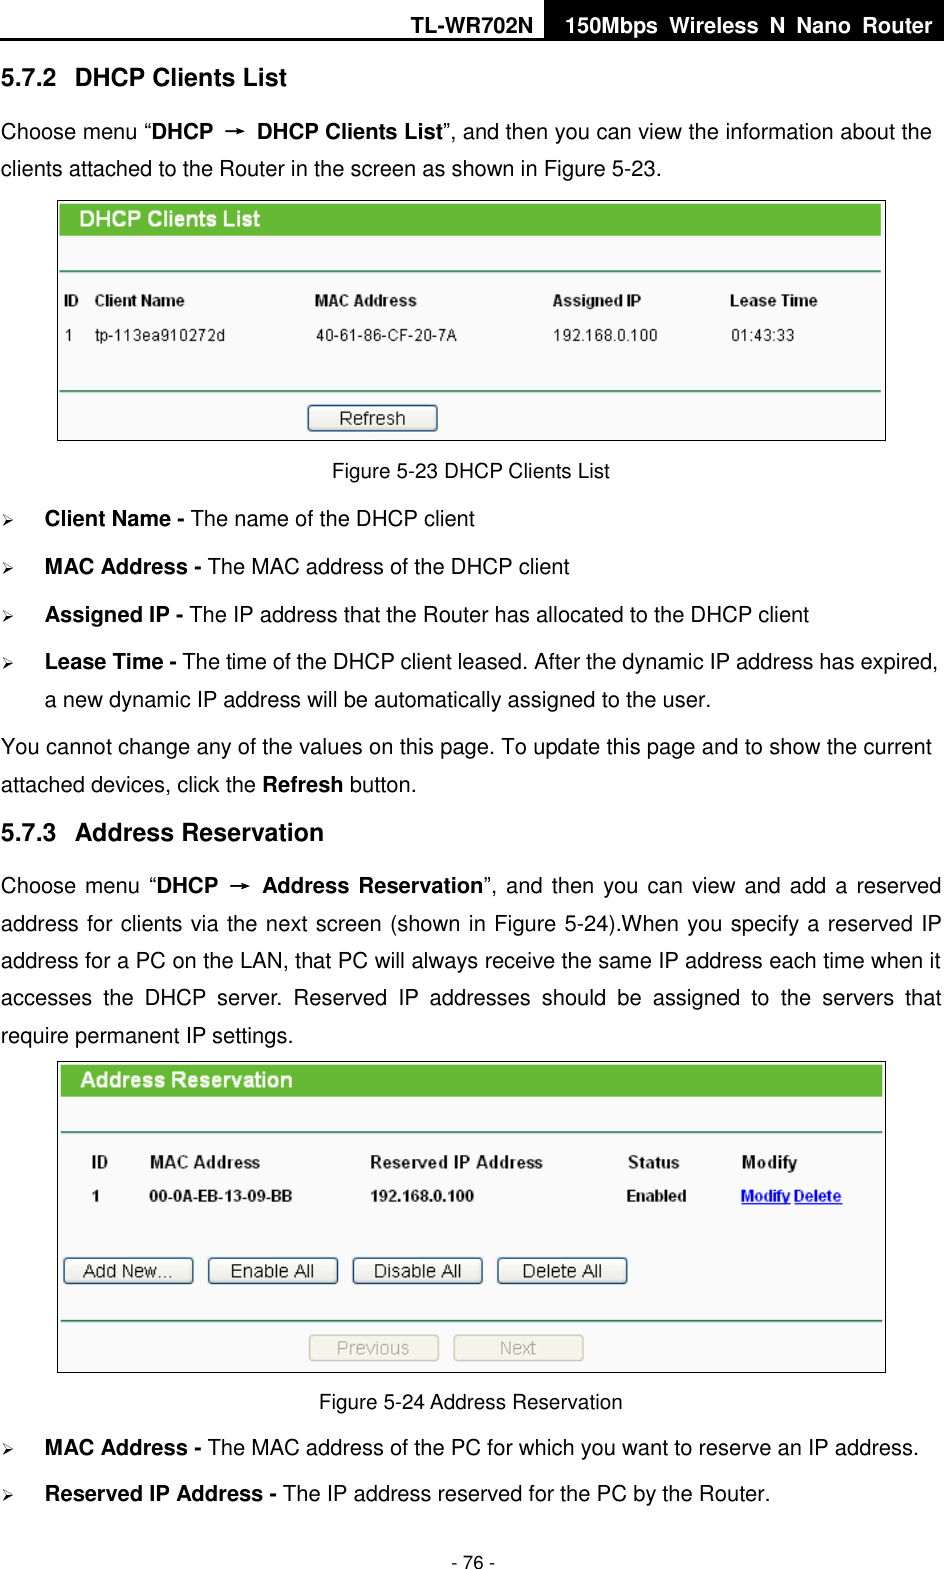 TL-WR702N 150Mbps  Wireless  N  Nano  Router  - 76 - 5.7.2  DHCP Clients List Choose menu “DHCP  →  DHCP Clients List”, and then you can view the information about the clients attached to the Router in the screen as shown in Figure 5-23.  Figure 5-23 DHCP Clients List  Client Name - The name of the DHCP client    MAC Address - The MAC address of the DHCP client    Assigned IP - The IP address that the Router has allocated to the DHCP client  Lease Time - The time of the DHCP client leased. After the dynamic IP address has expired, a new dynamic IP address will be automatically assigned to the user.     You cannot change any of the values on this page. To update this page and to show the current attached devices, click the Refresh button. 5.7.3  Address Reservation Choose menu “DHCP  →  Address Reservation”, and then you can view and add a reserved address for clients via the next screen (shown in Figure 5-24).When you specify a reserved IP address for a PC on the LAN, that PC will always receive the same IP address each time when it accesses  the  DHCP  server.  Reserved  IP  addresses  should  be  assigned  to  the  servers  that require permanent IP settings.    Figure 5-24 Address Reservation  MAC Address - The MAC address of the PC for which you want to reserve an IP address.  Reserved IP Address - The IP address reserved for the PC by the Router. 